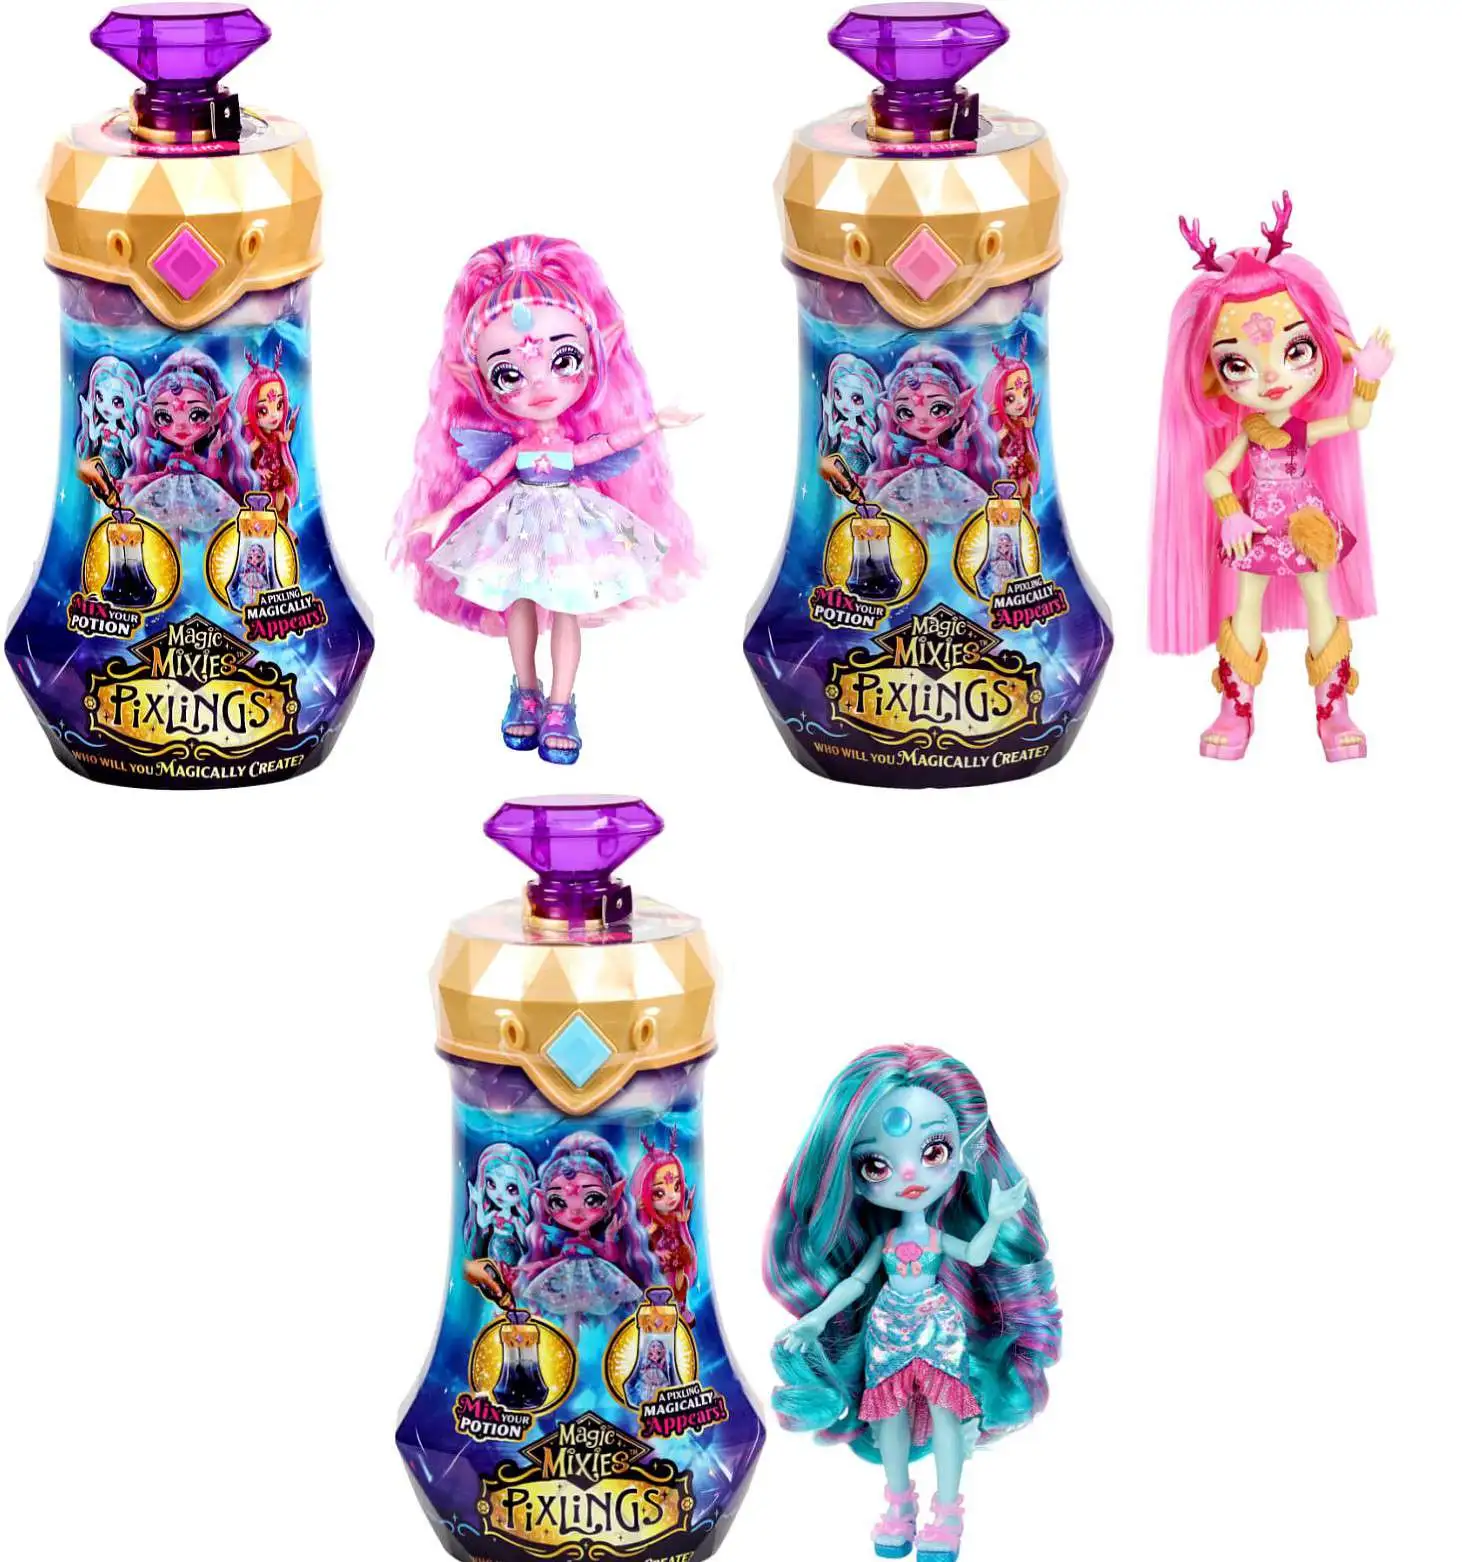 MAGIC MIXIES PIXLING DOLL - THE TOY STORE